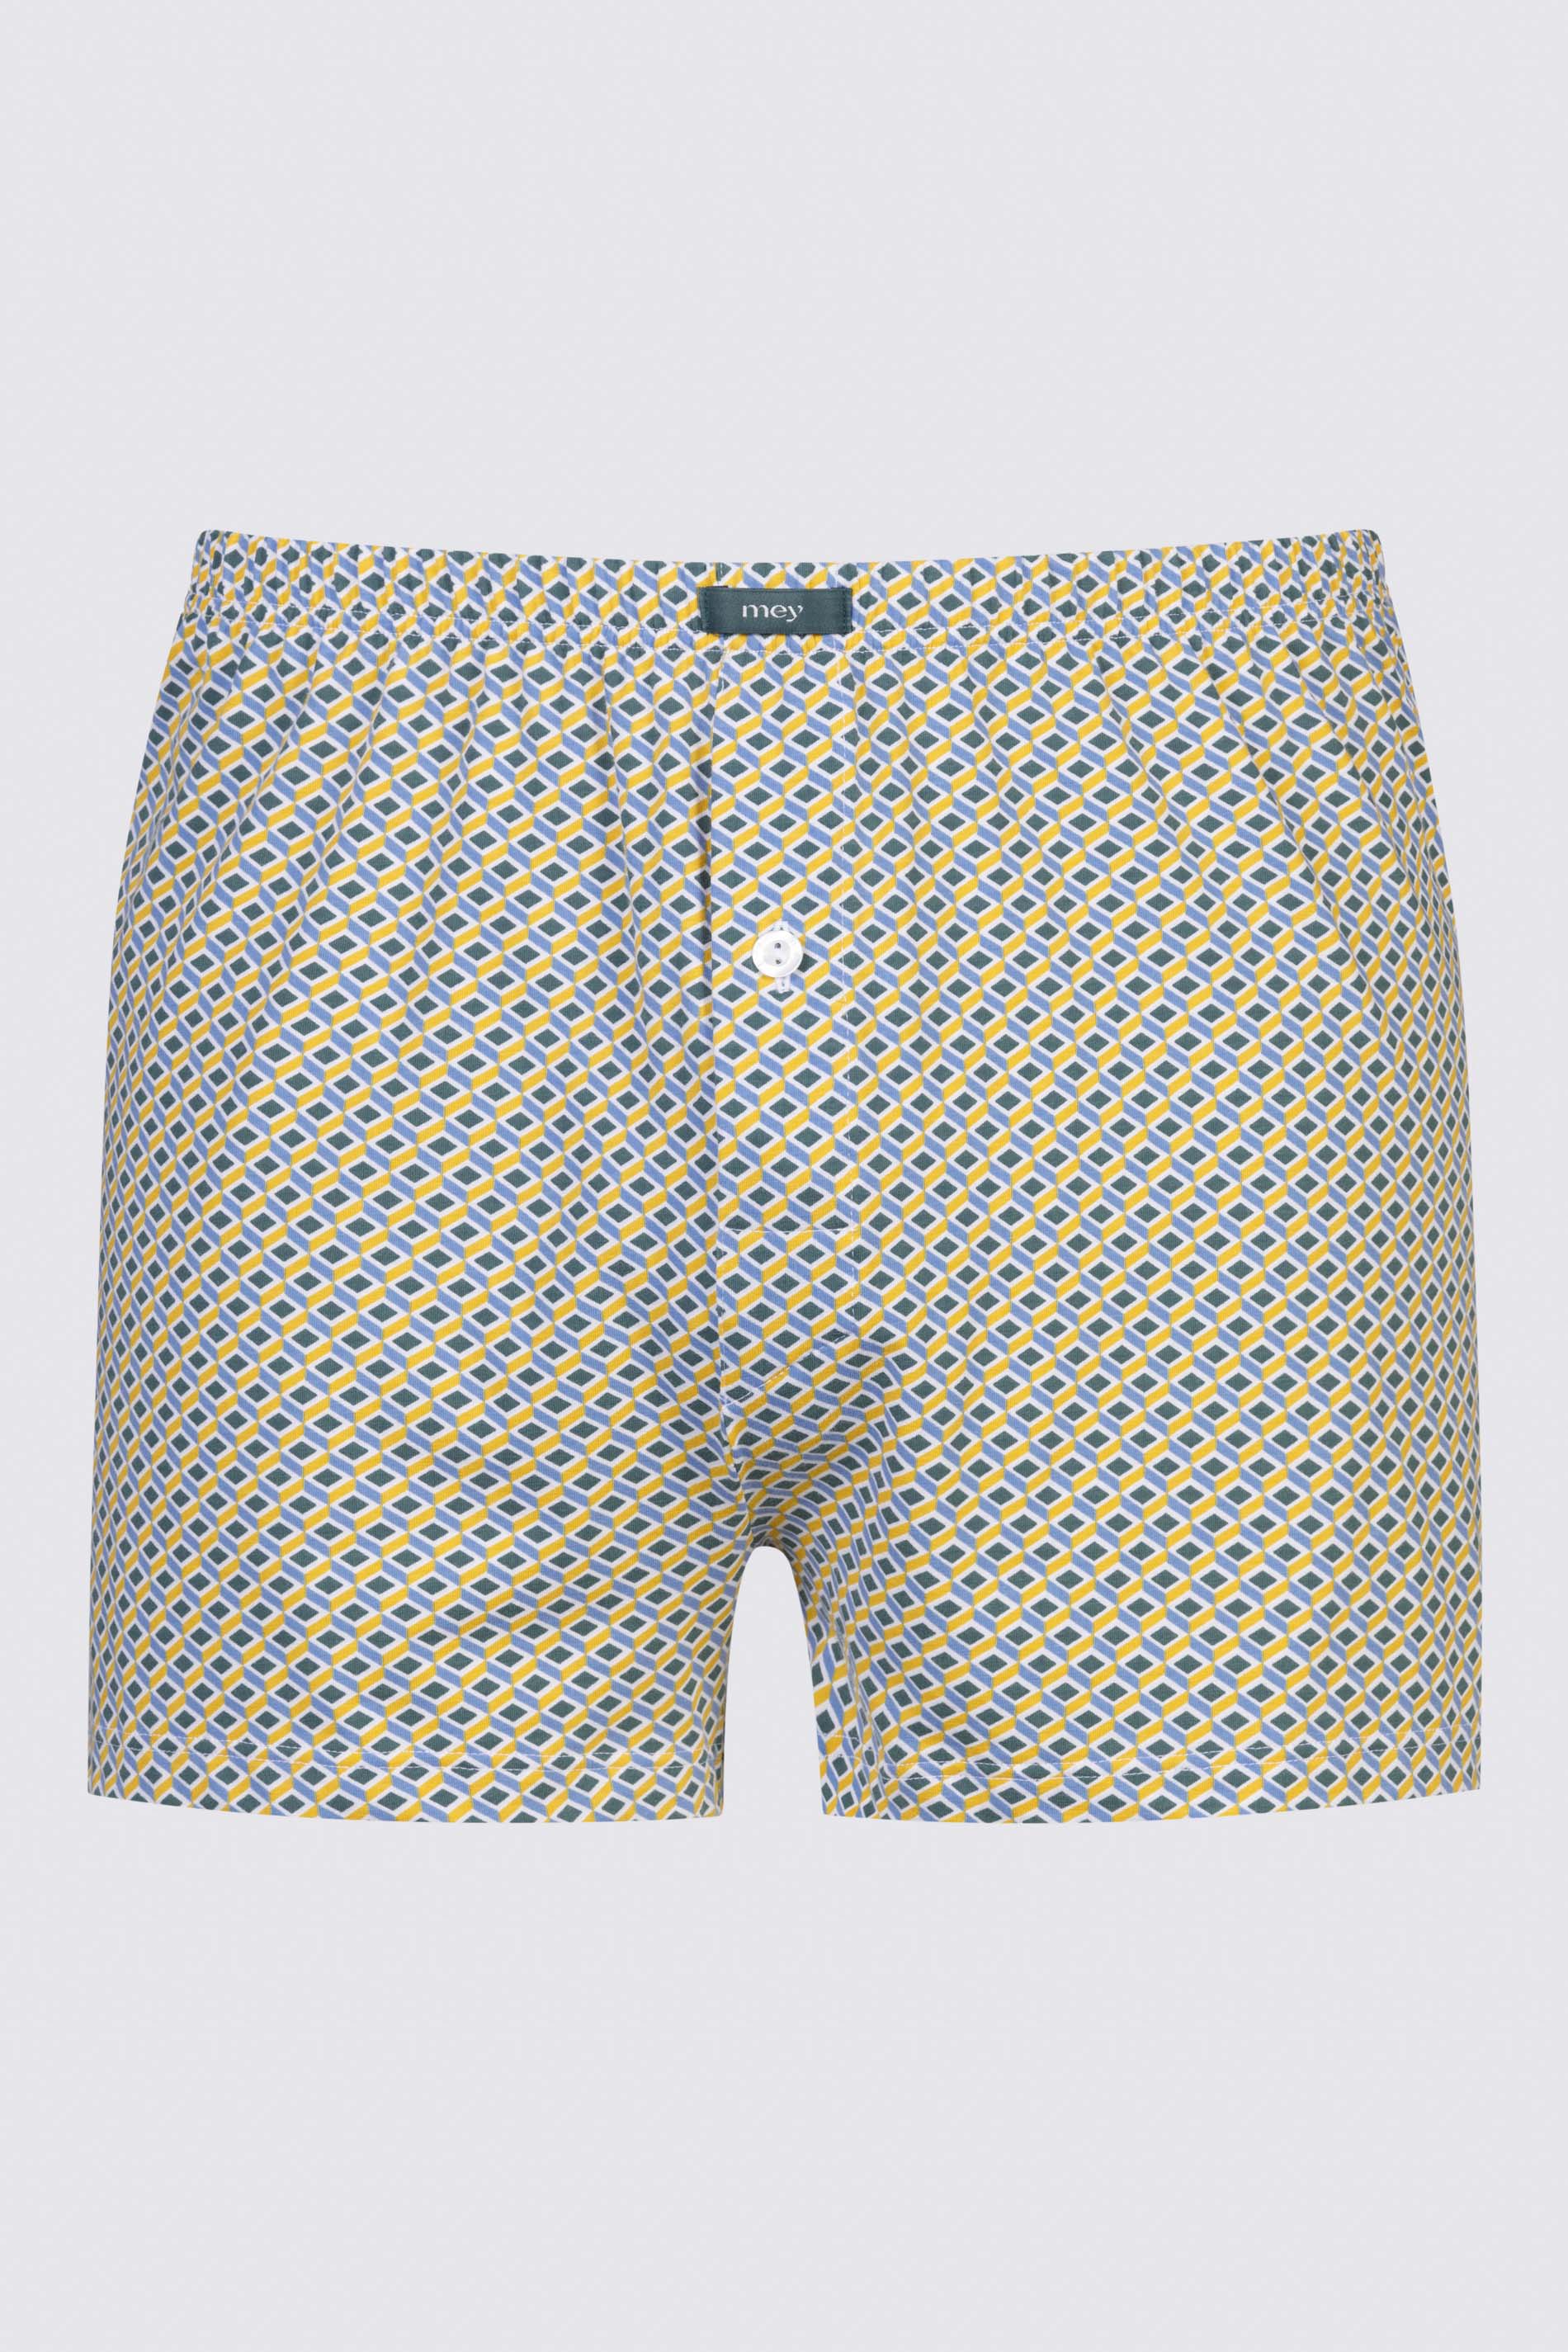 Boxer shorts Serie Cube Uitknippen | mey®